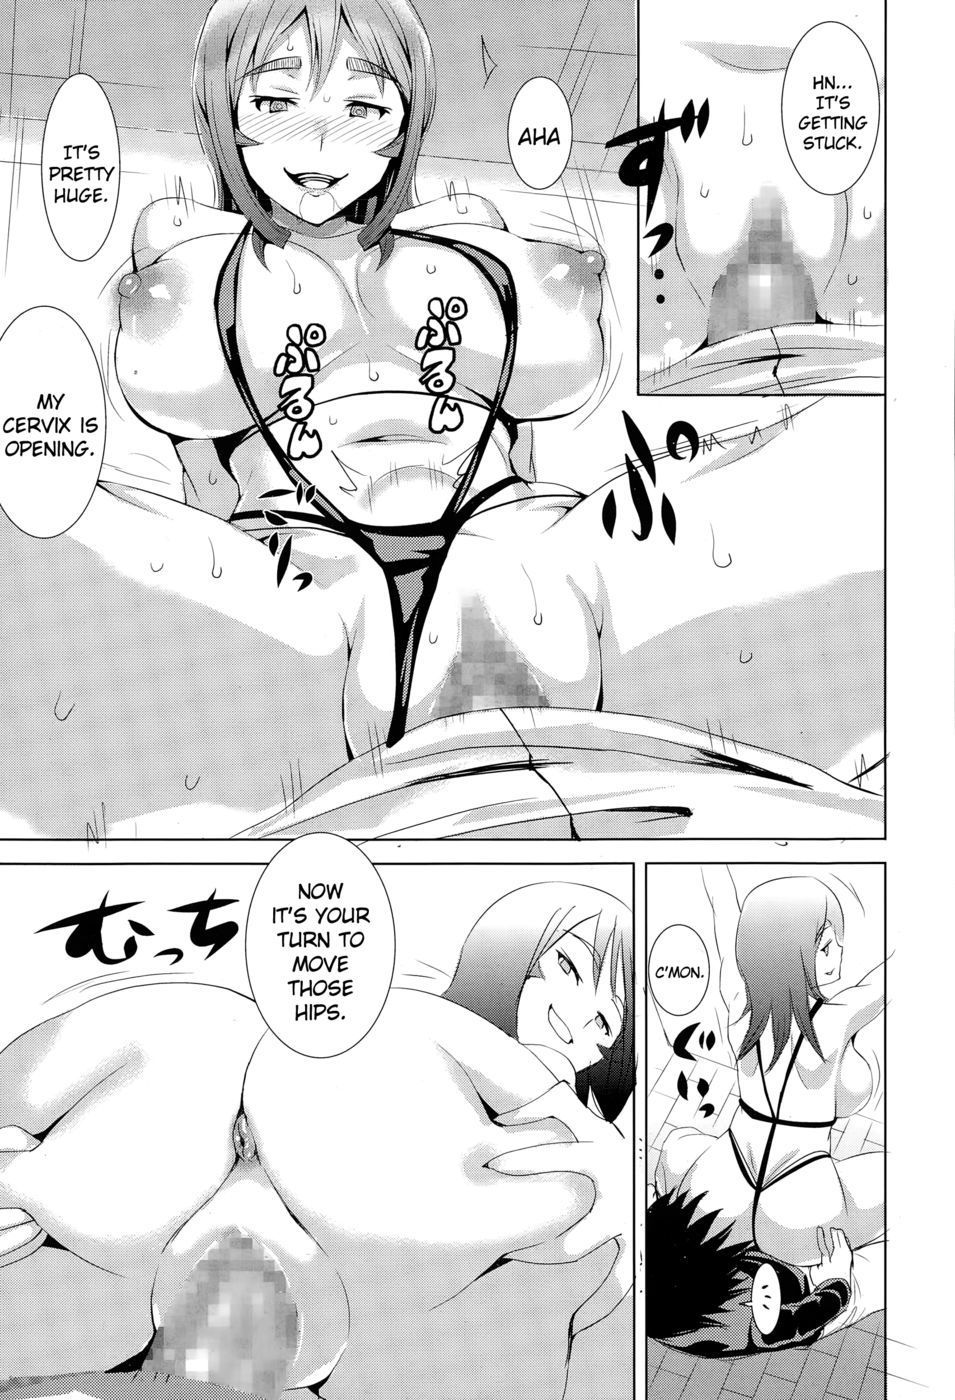 The Secret of a Quiet Housewife 1 Naughty Hentai Manga Woman image picture